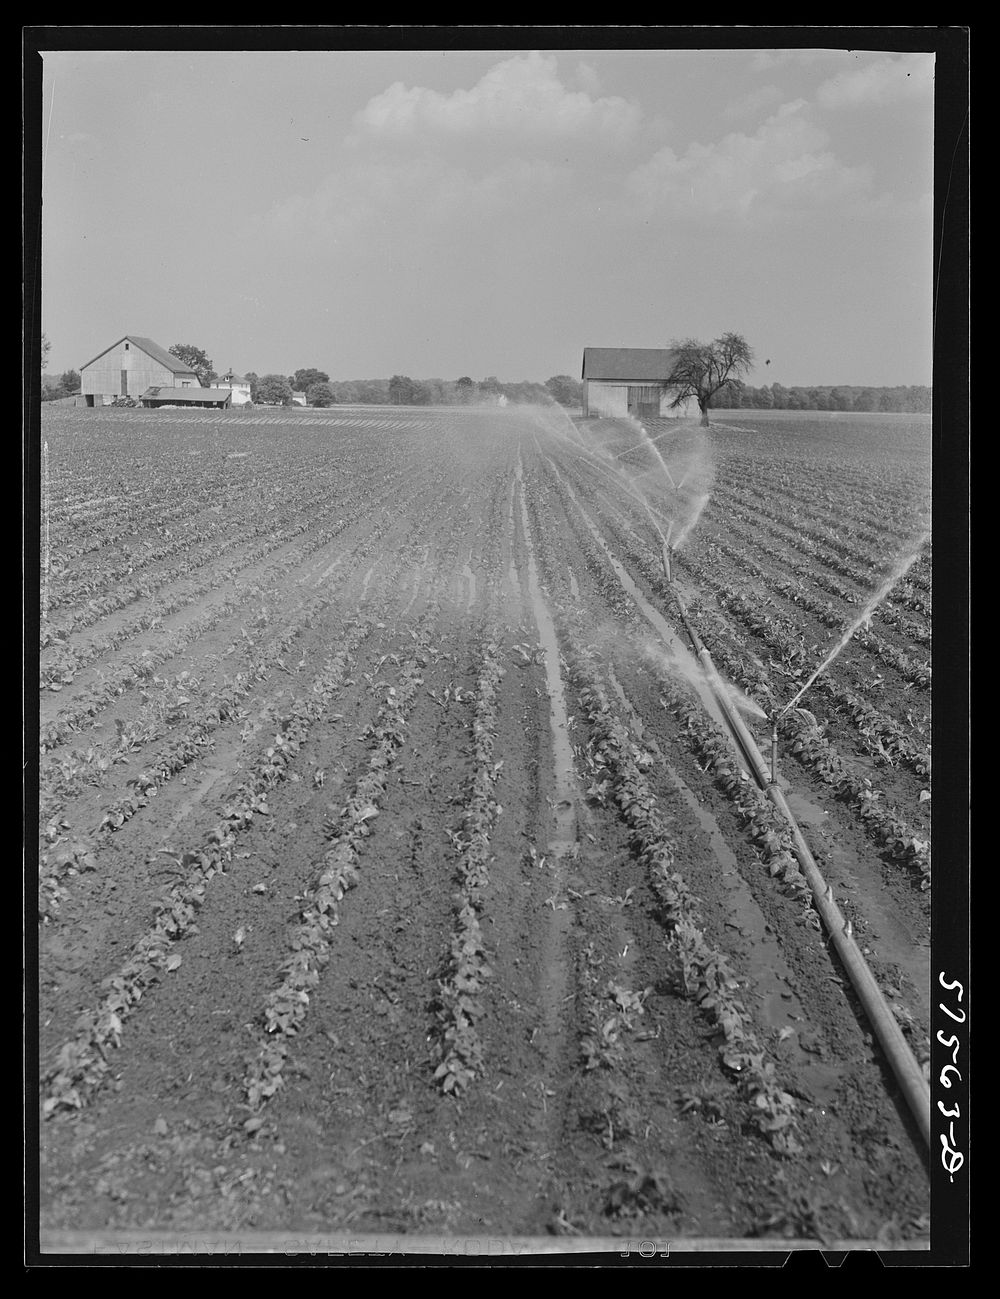 Portable irrigation unit in bean field. Starkey Farms, Morrisville, Pennsylvania. Sourced from the Library of Congress.